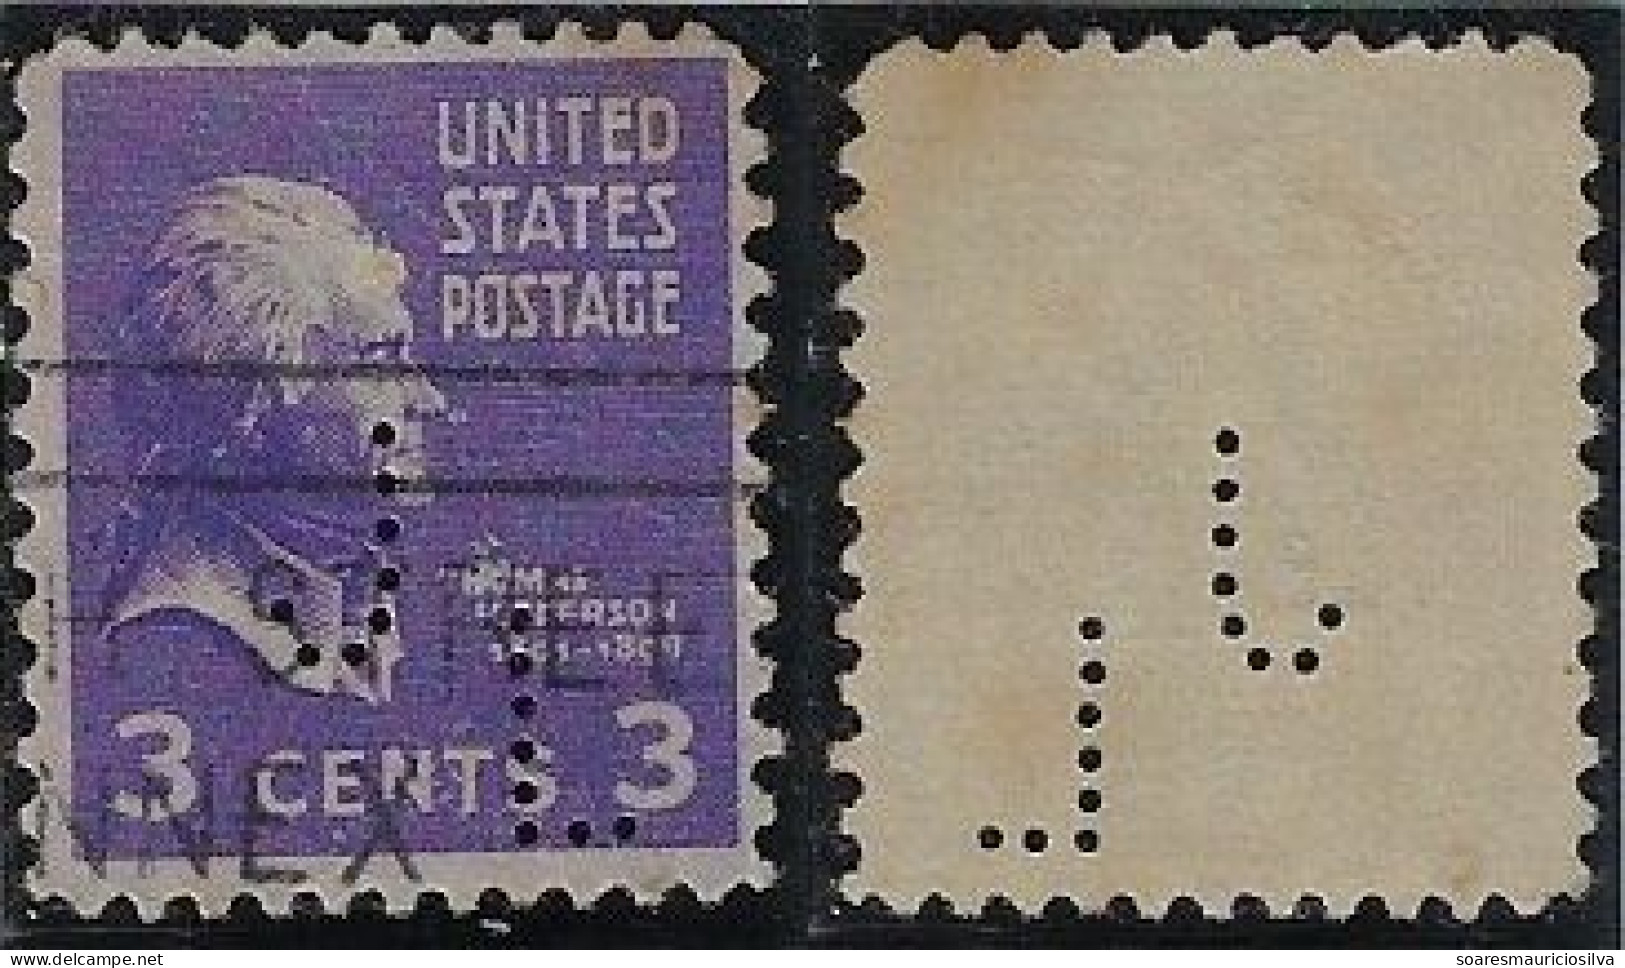 USA United States 1923/1938 Stamp With Perfin JL By John Lucas & Company Incorported From New York Lochung Perfore - Perfins